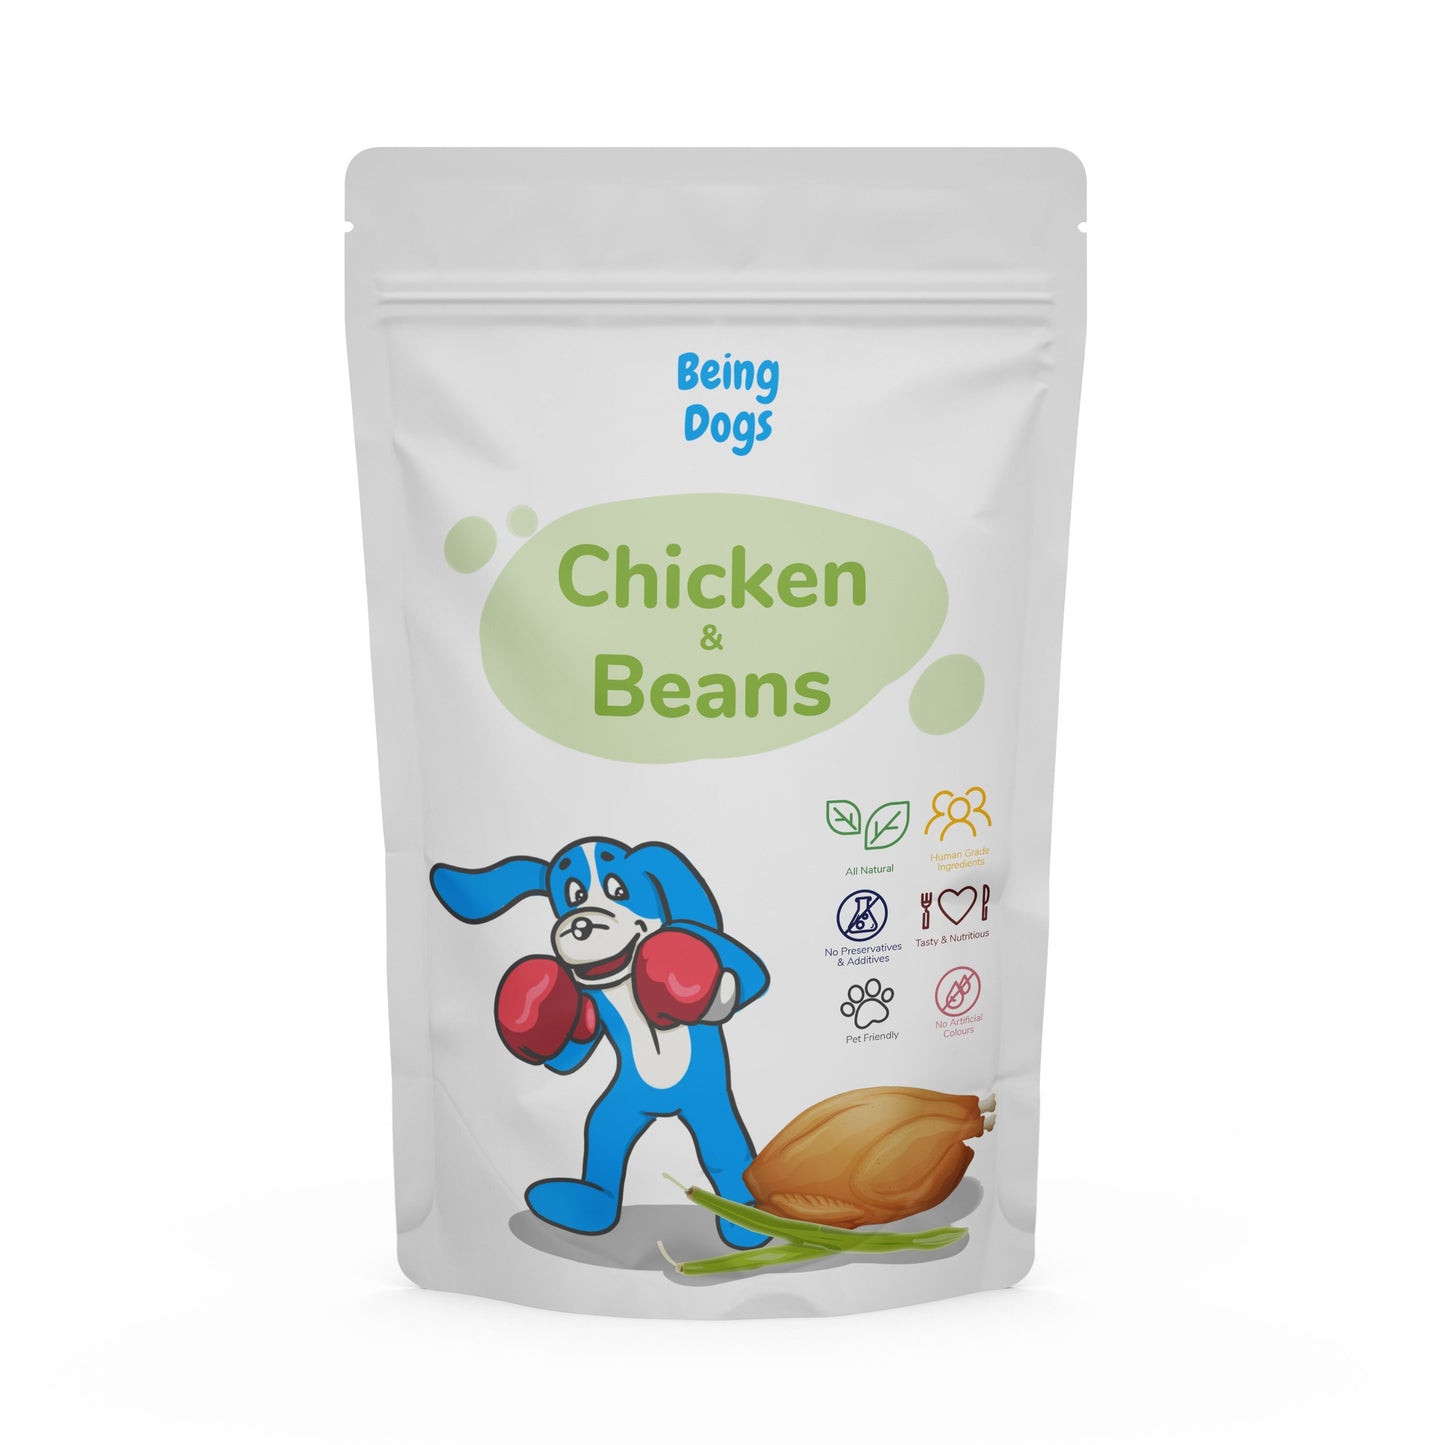 Chicken & Beans Meal For Dogs (Single Packet), Customised, Made Fresh Daily, Zero Preservatives, High In Protein